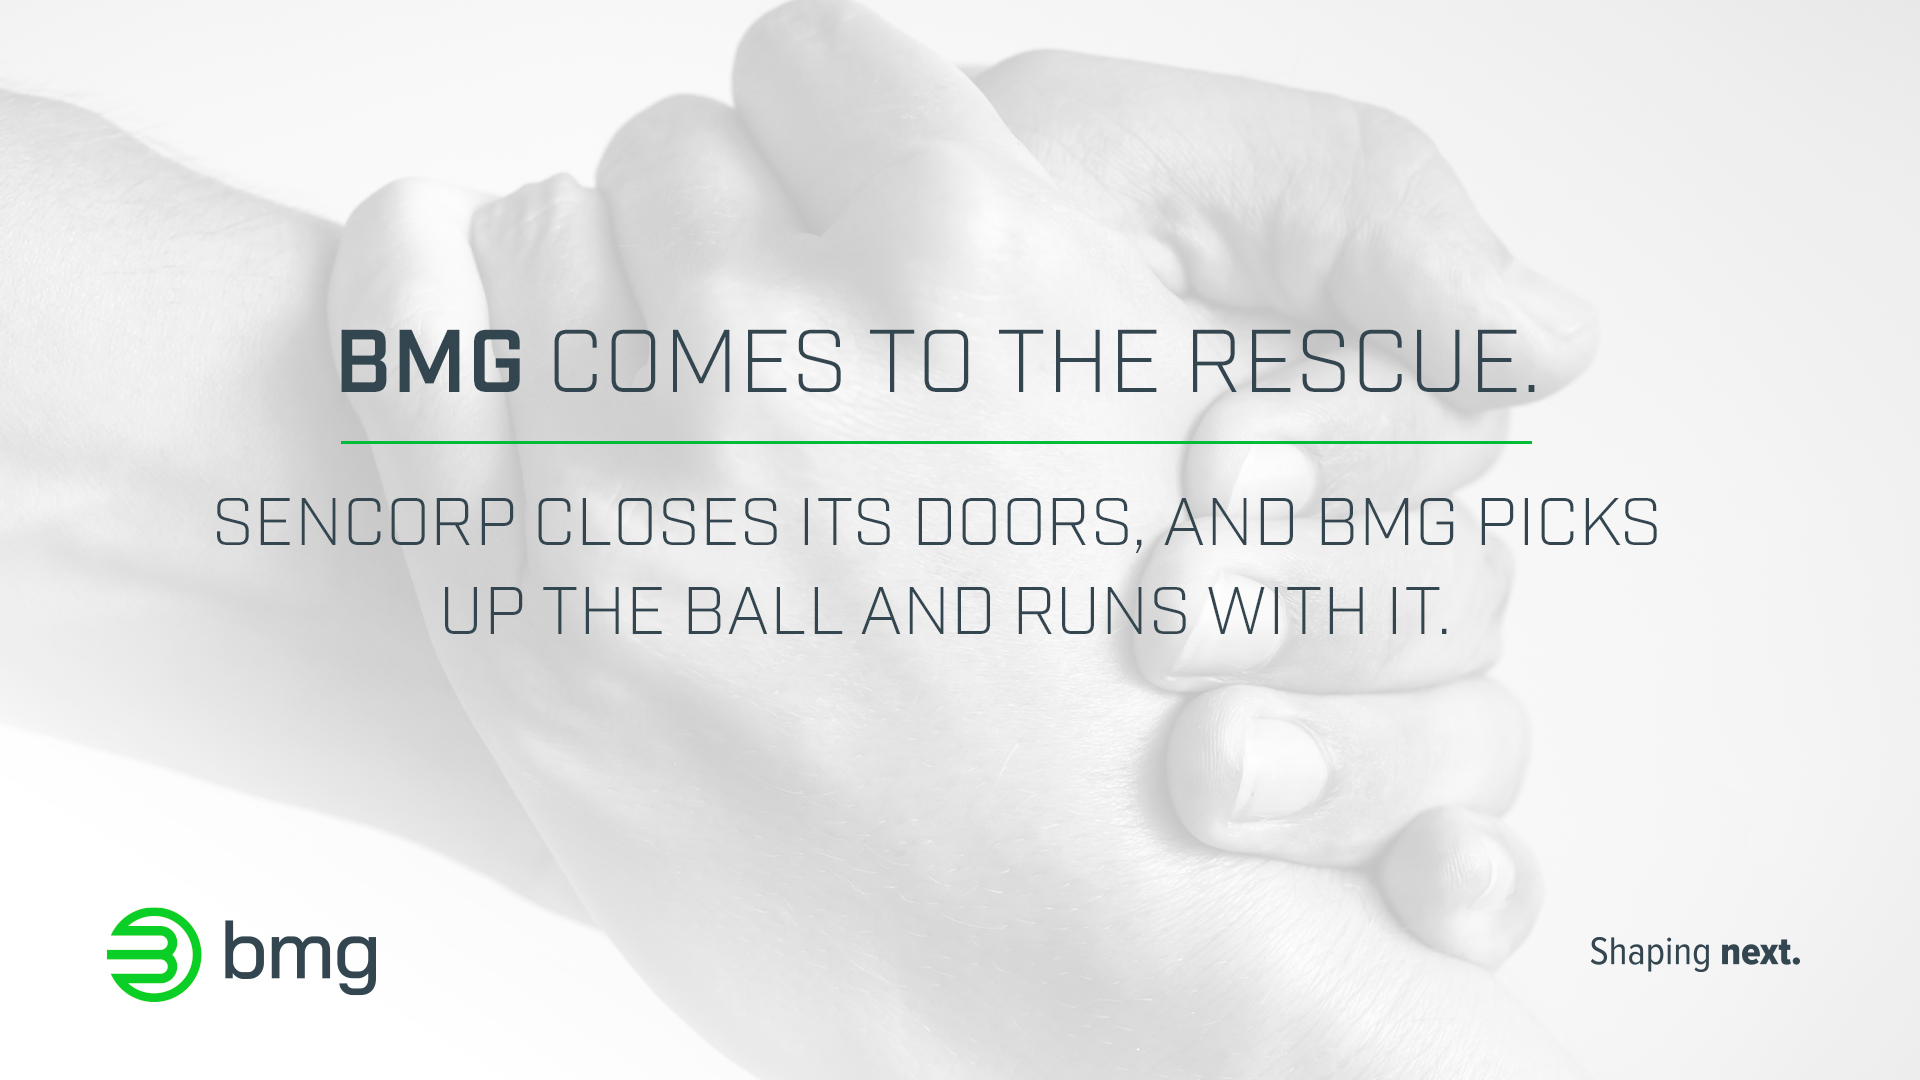 BMG Comes to the Rescue. Sencorp Closes Its Doors, and BMG Picks Up the Ball and Runs with It.